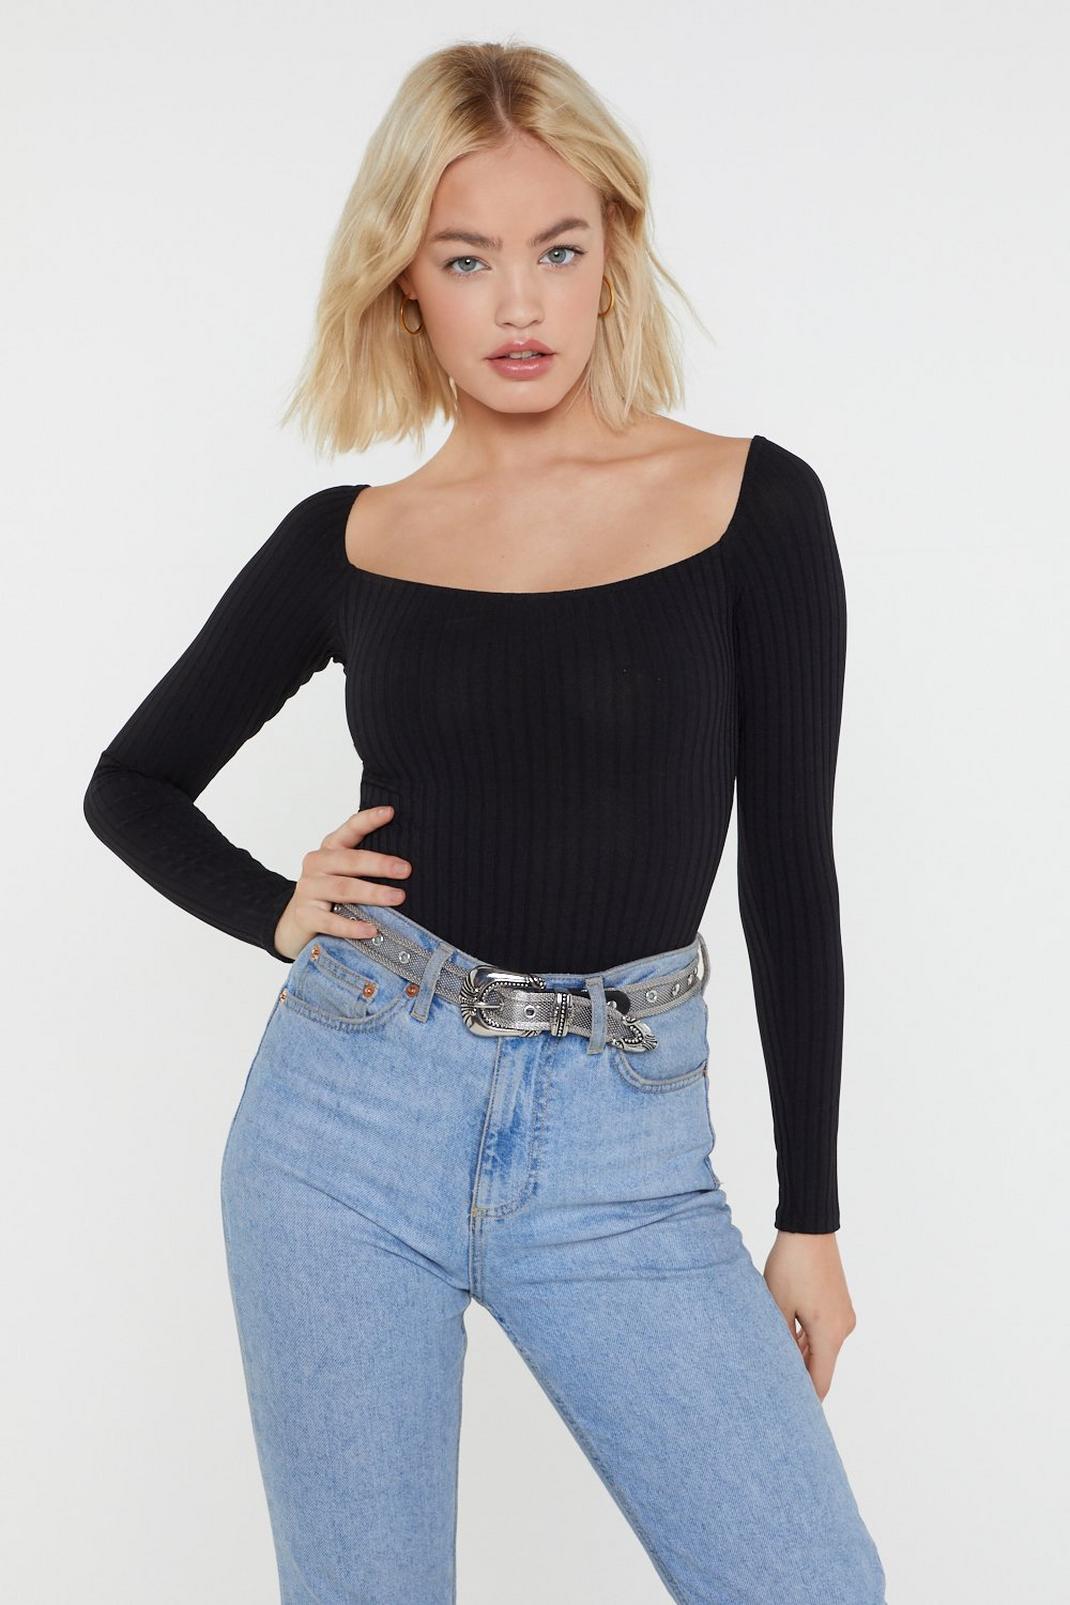 Home is Square the Heart is Ribbed Bodysuit | Nasty Gal